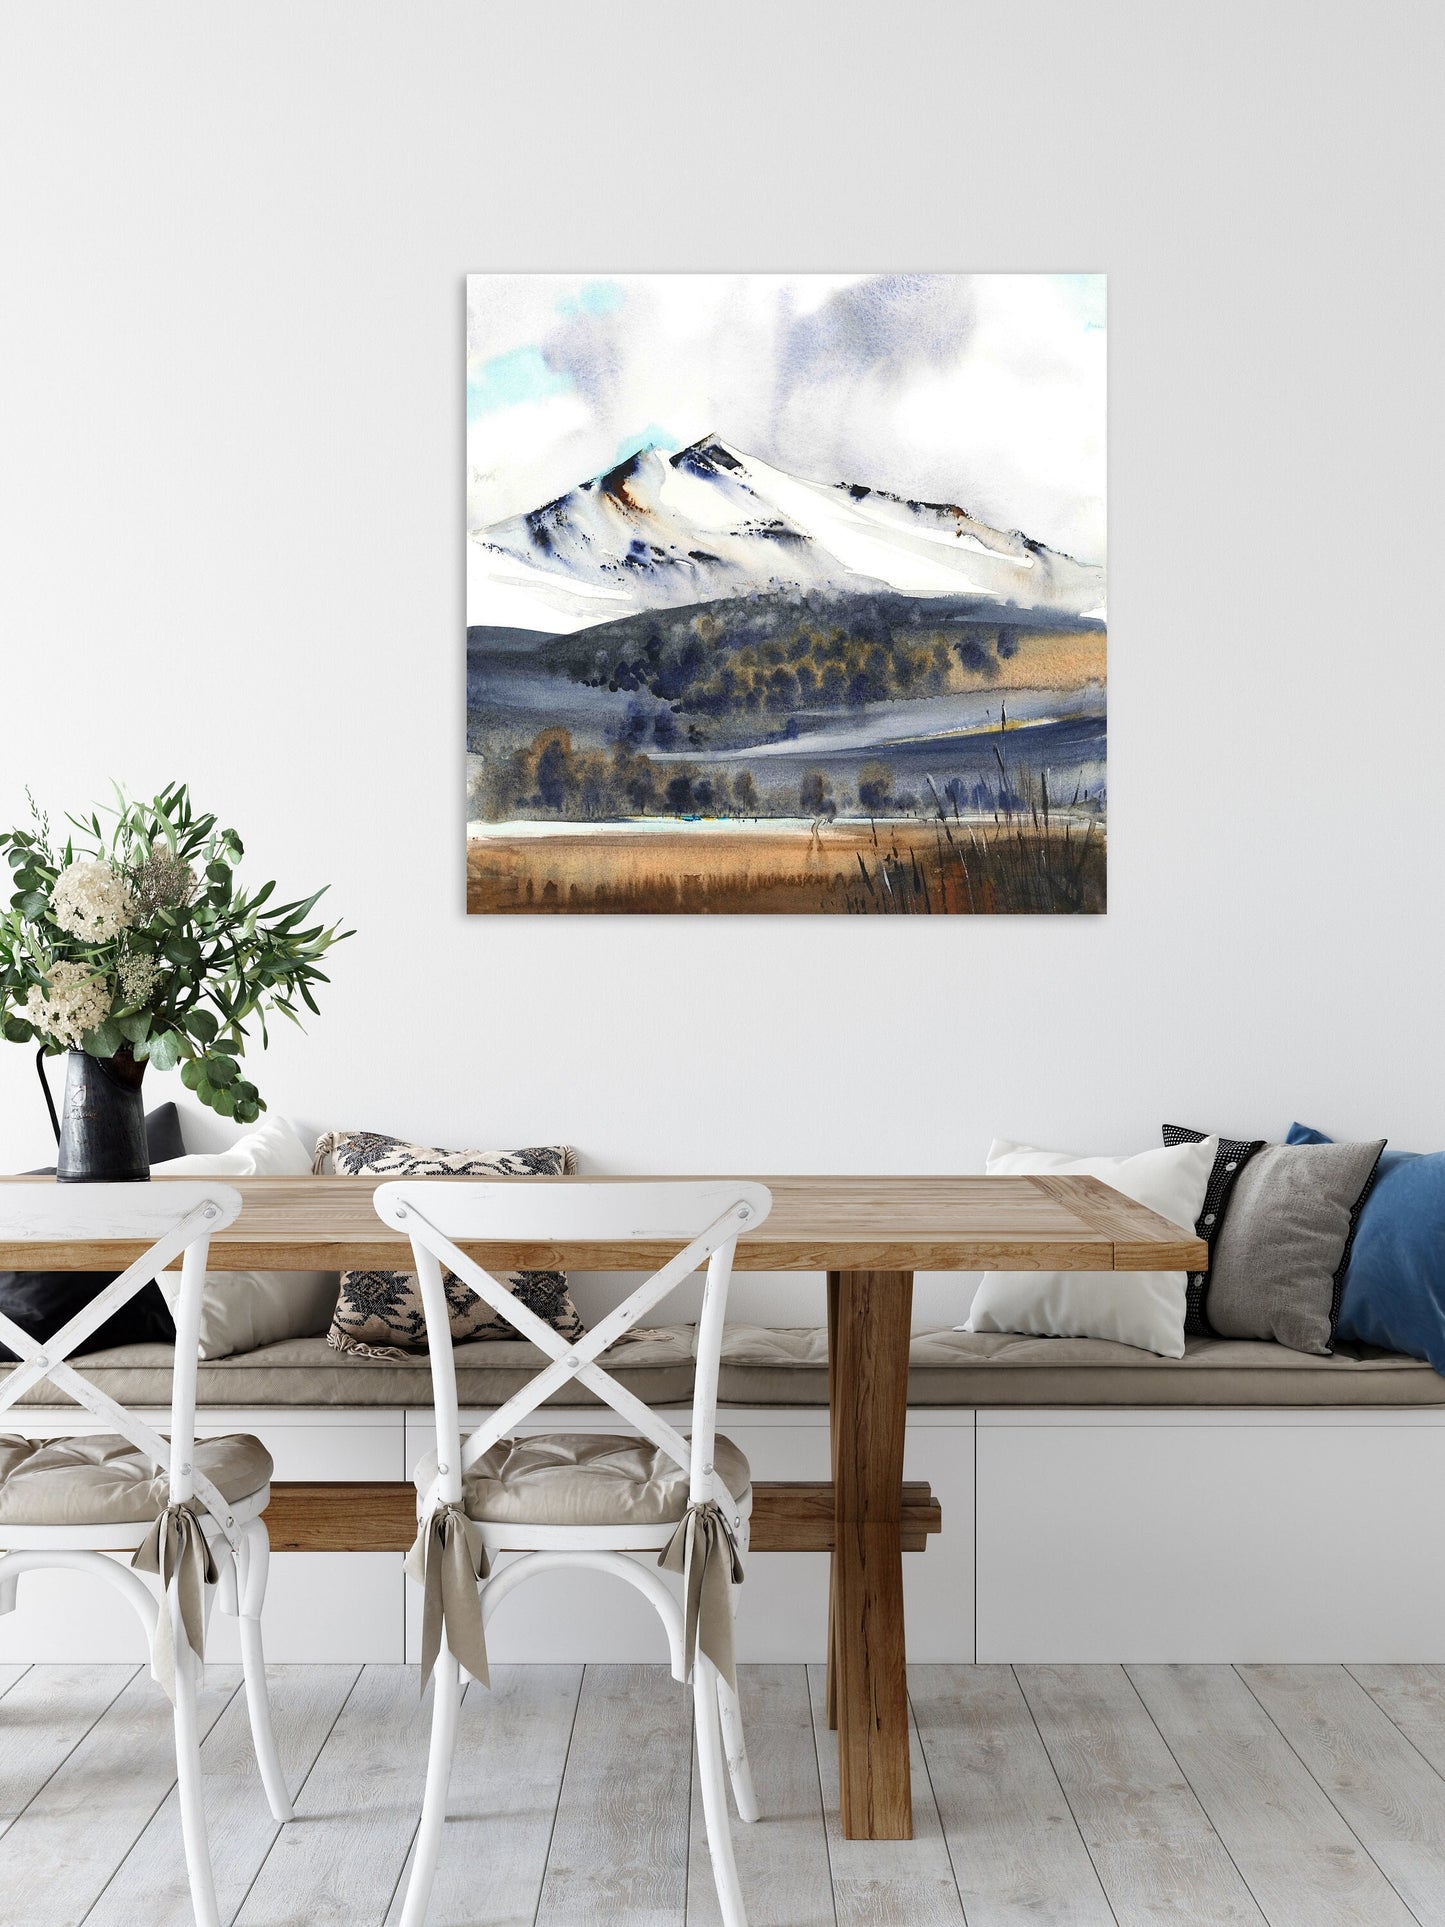 Fall Mountain Art Print, Square Abstract Painting, Watercolor Landscape, Large Print on Canvas, Living Room Wall Decor